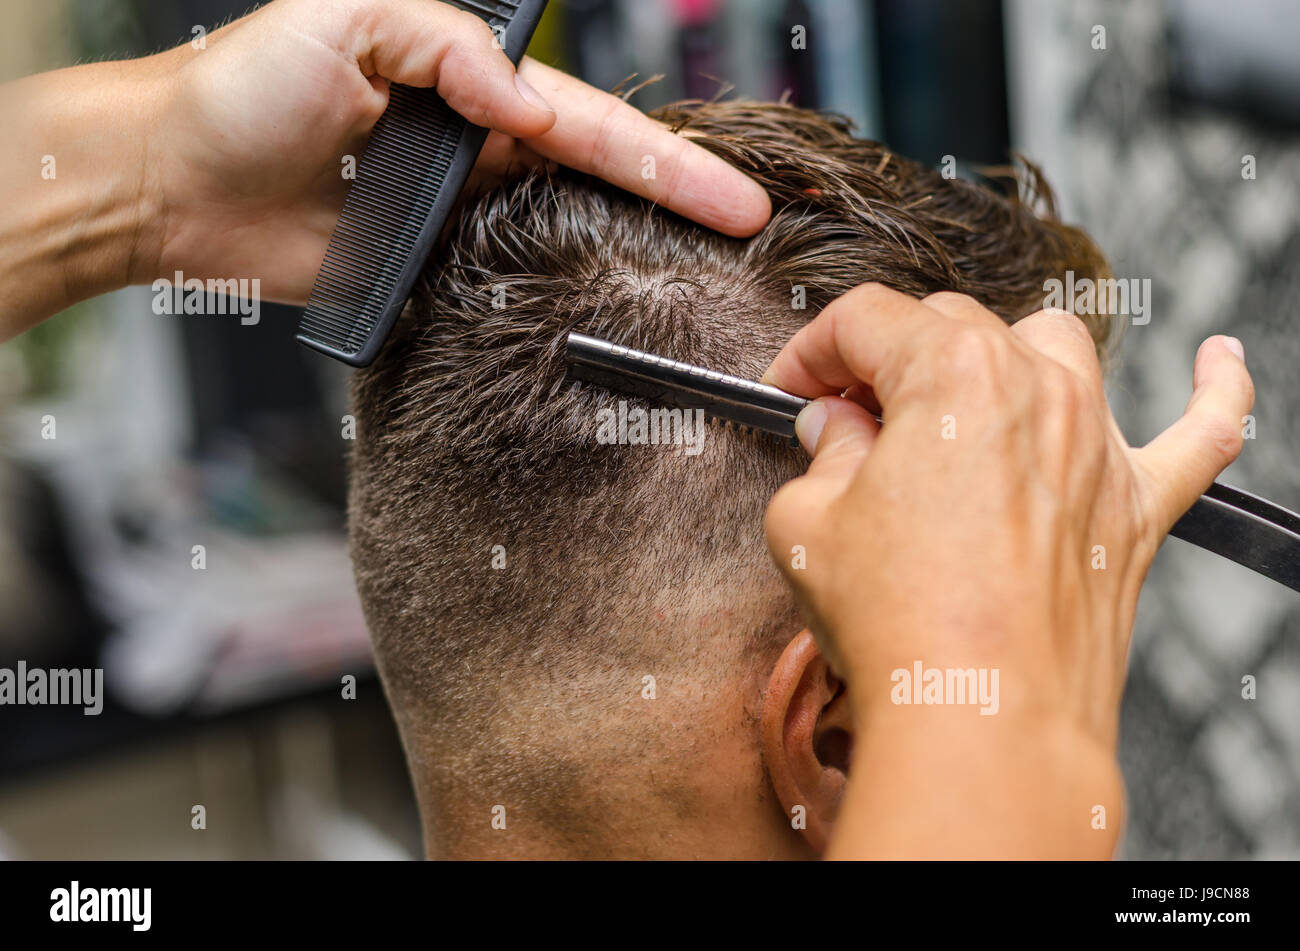 Hairdresser cutting man's hair with toothed razor Stock Photo